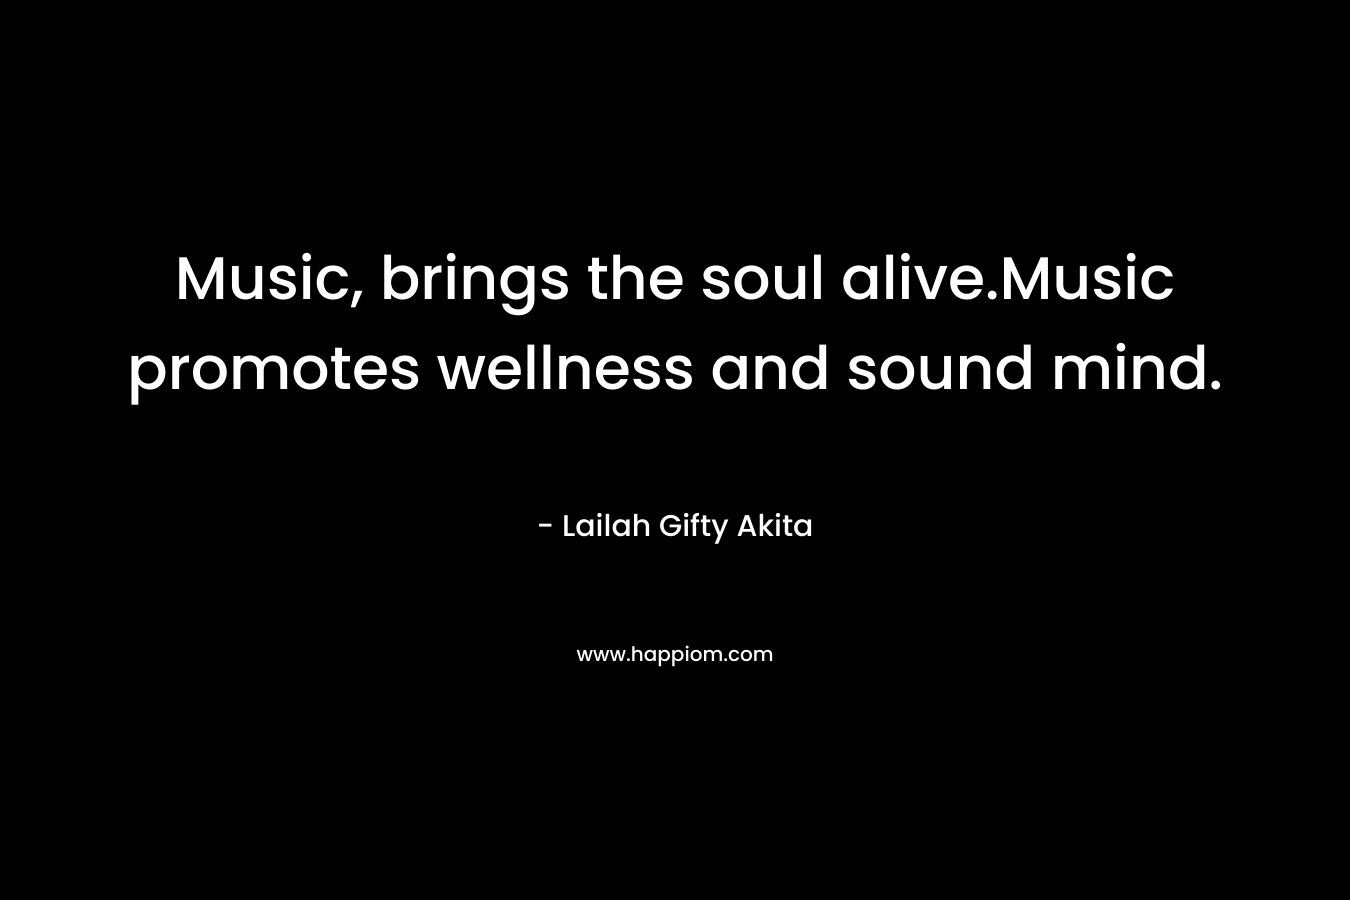 Music, brings the soul alive.Music promotes wellness and sound mind. – Lailah Gifty Akita